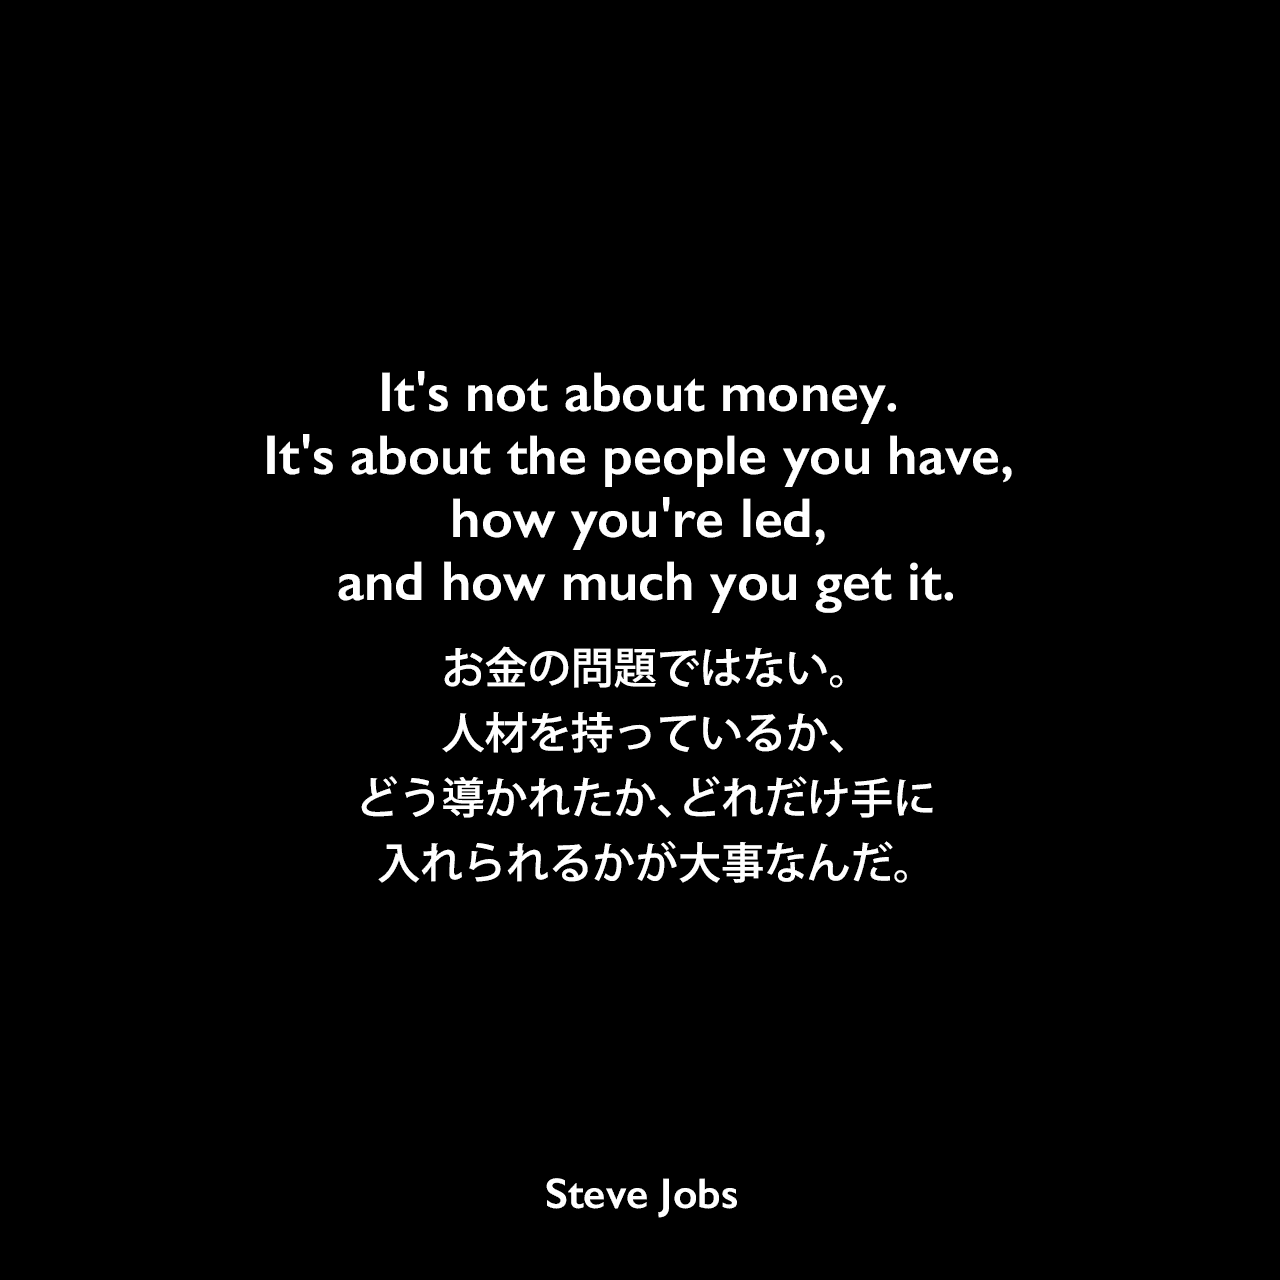 It's not about money. It's about the people you have, how you're led, and how much you get it.お金の問題ではない。人材を持っているか、どう導かれたか、どれだけ手に入れられるかが大事なんだ。- 1998年11月9日 フォーチュン誌よりSteve Jobs